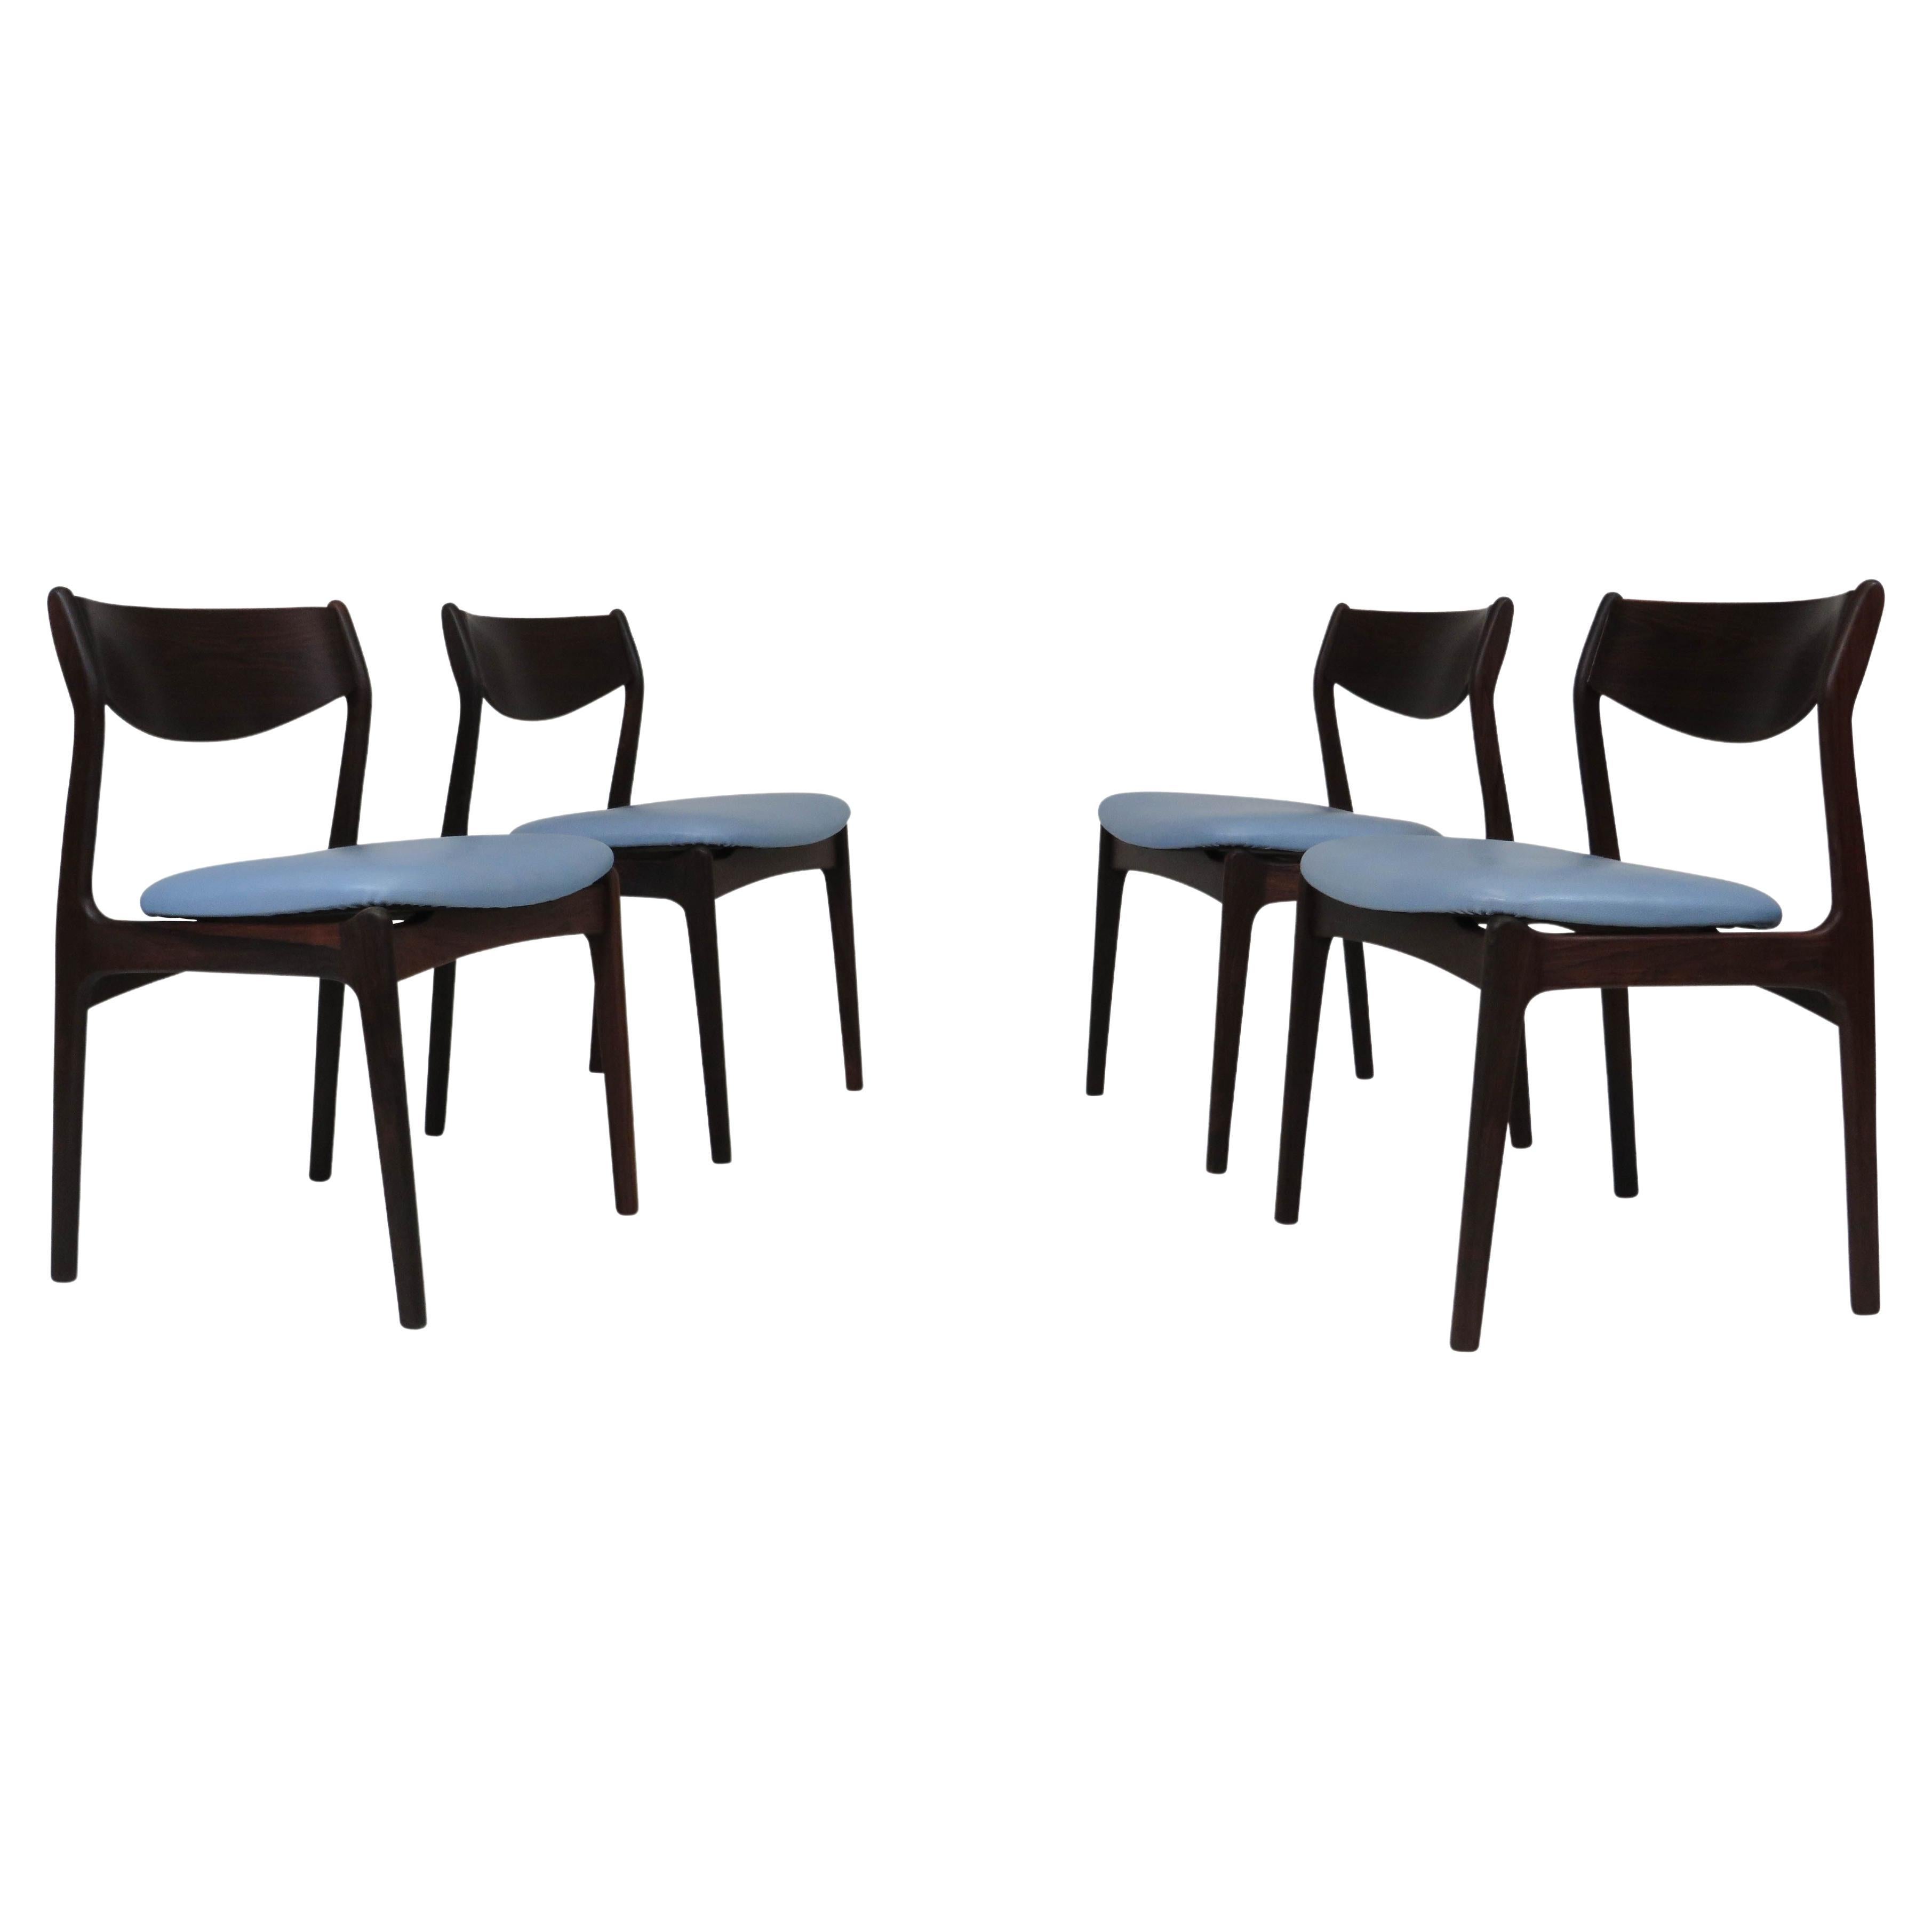 Four PE Jorgensen Danish Rosewood Dining Chairs in Sky Blue Leather For Sale